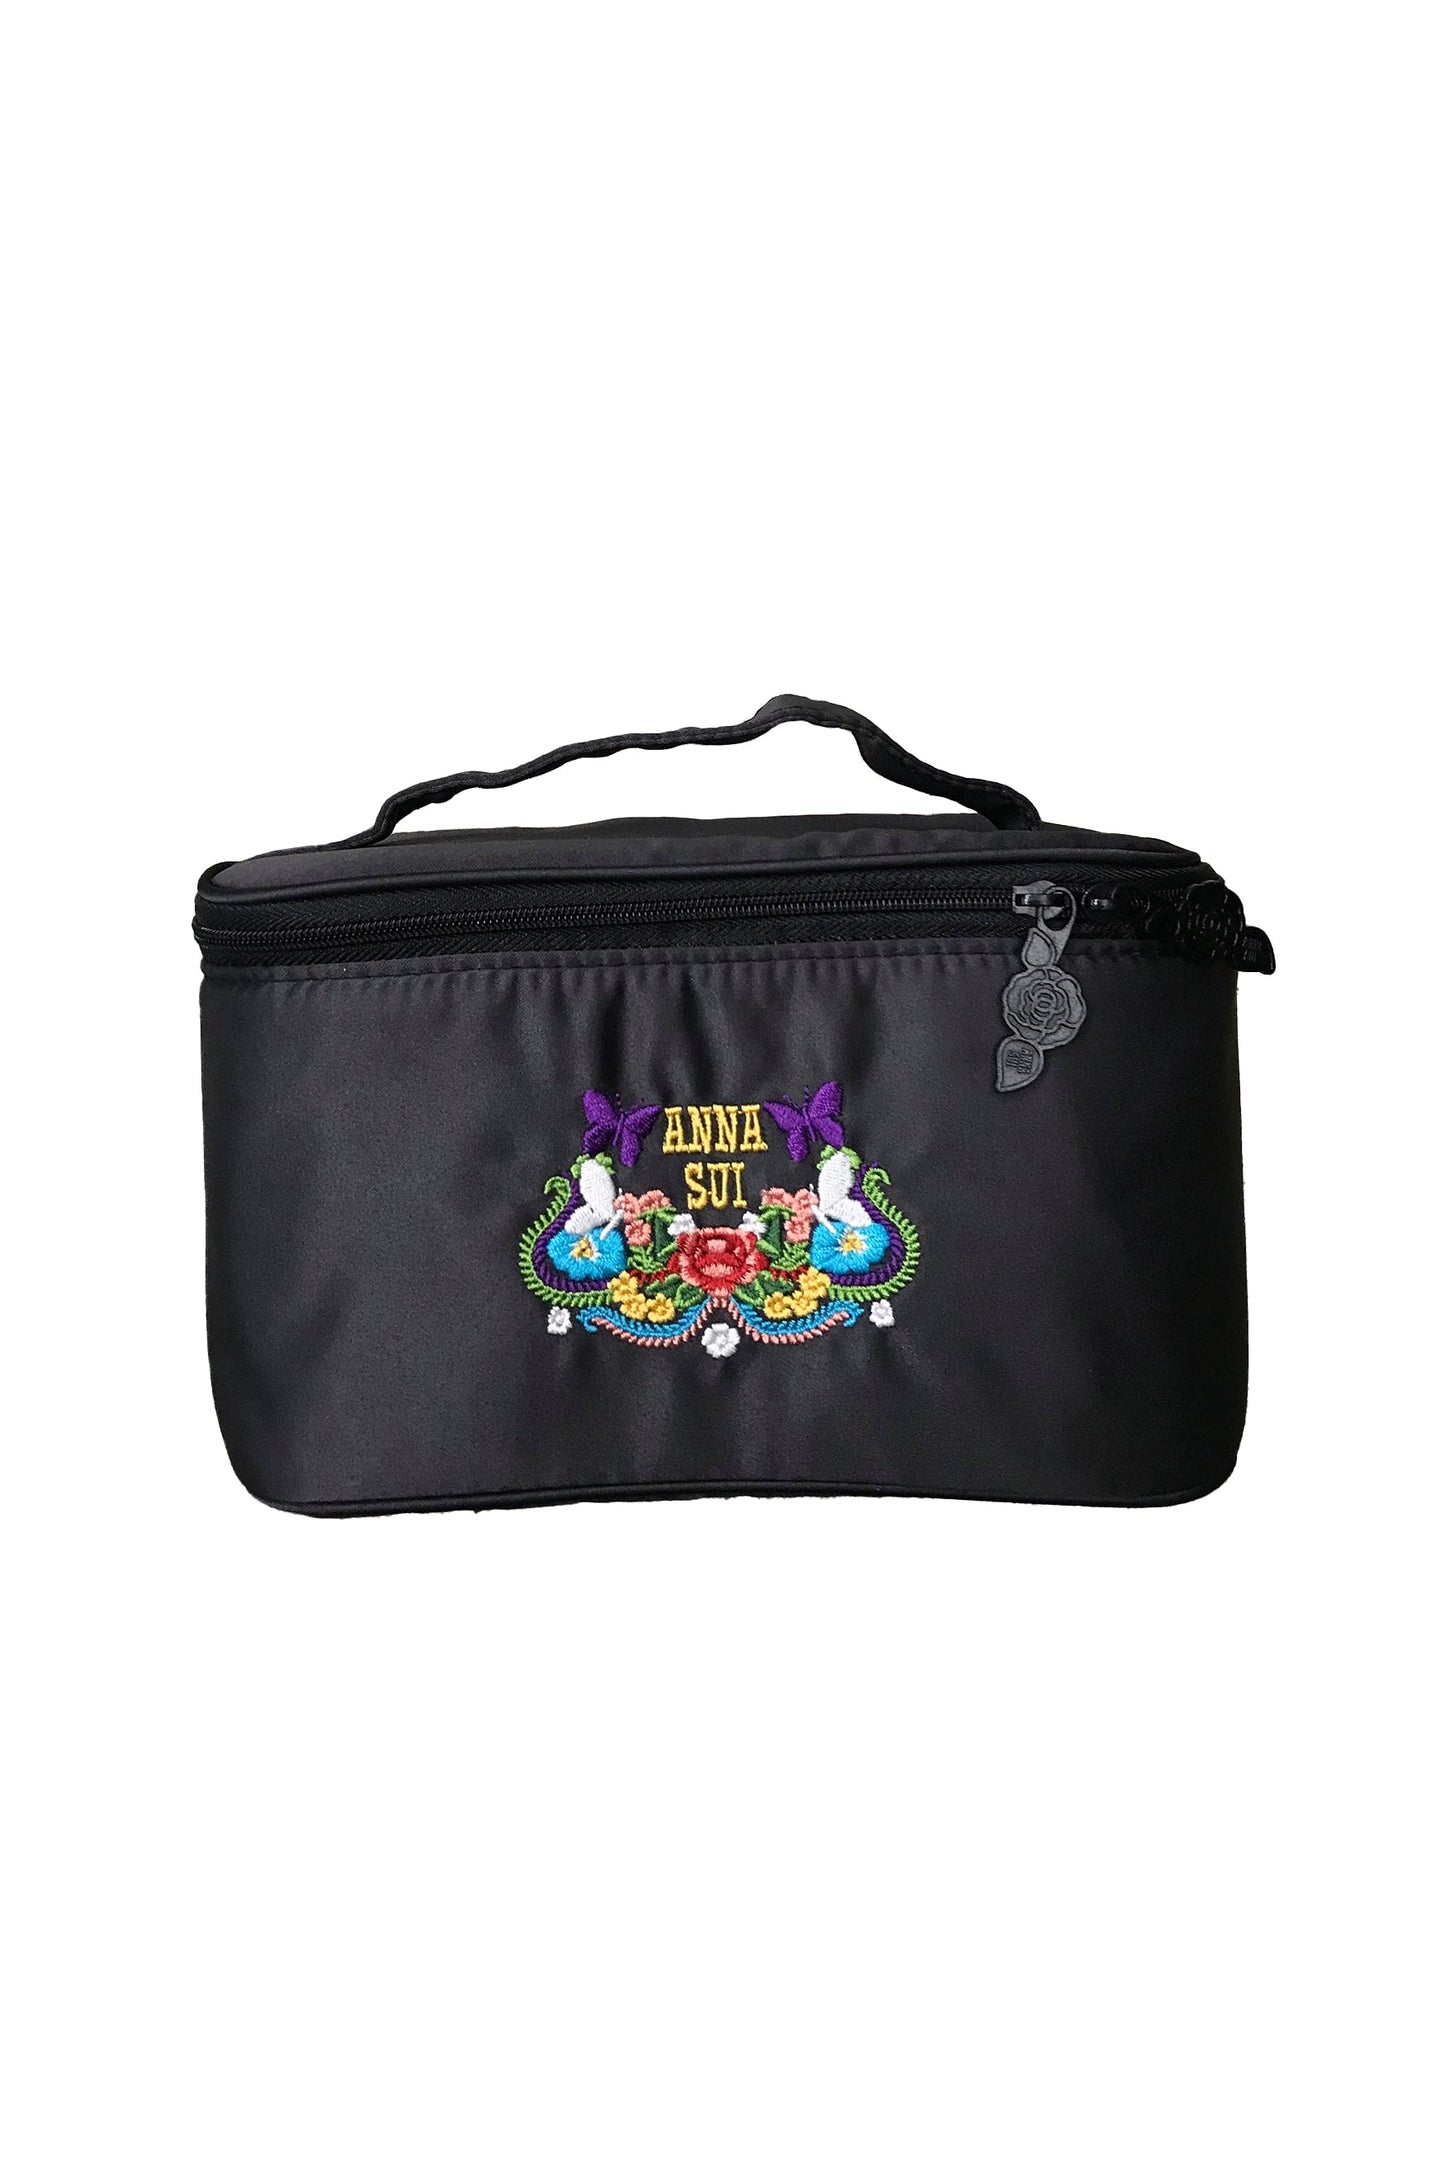 Black Vanity Pouch, rose for unzipping, labeled & adorned with Anna Label, butterflies and flowers